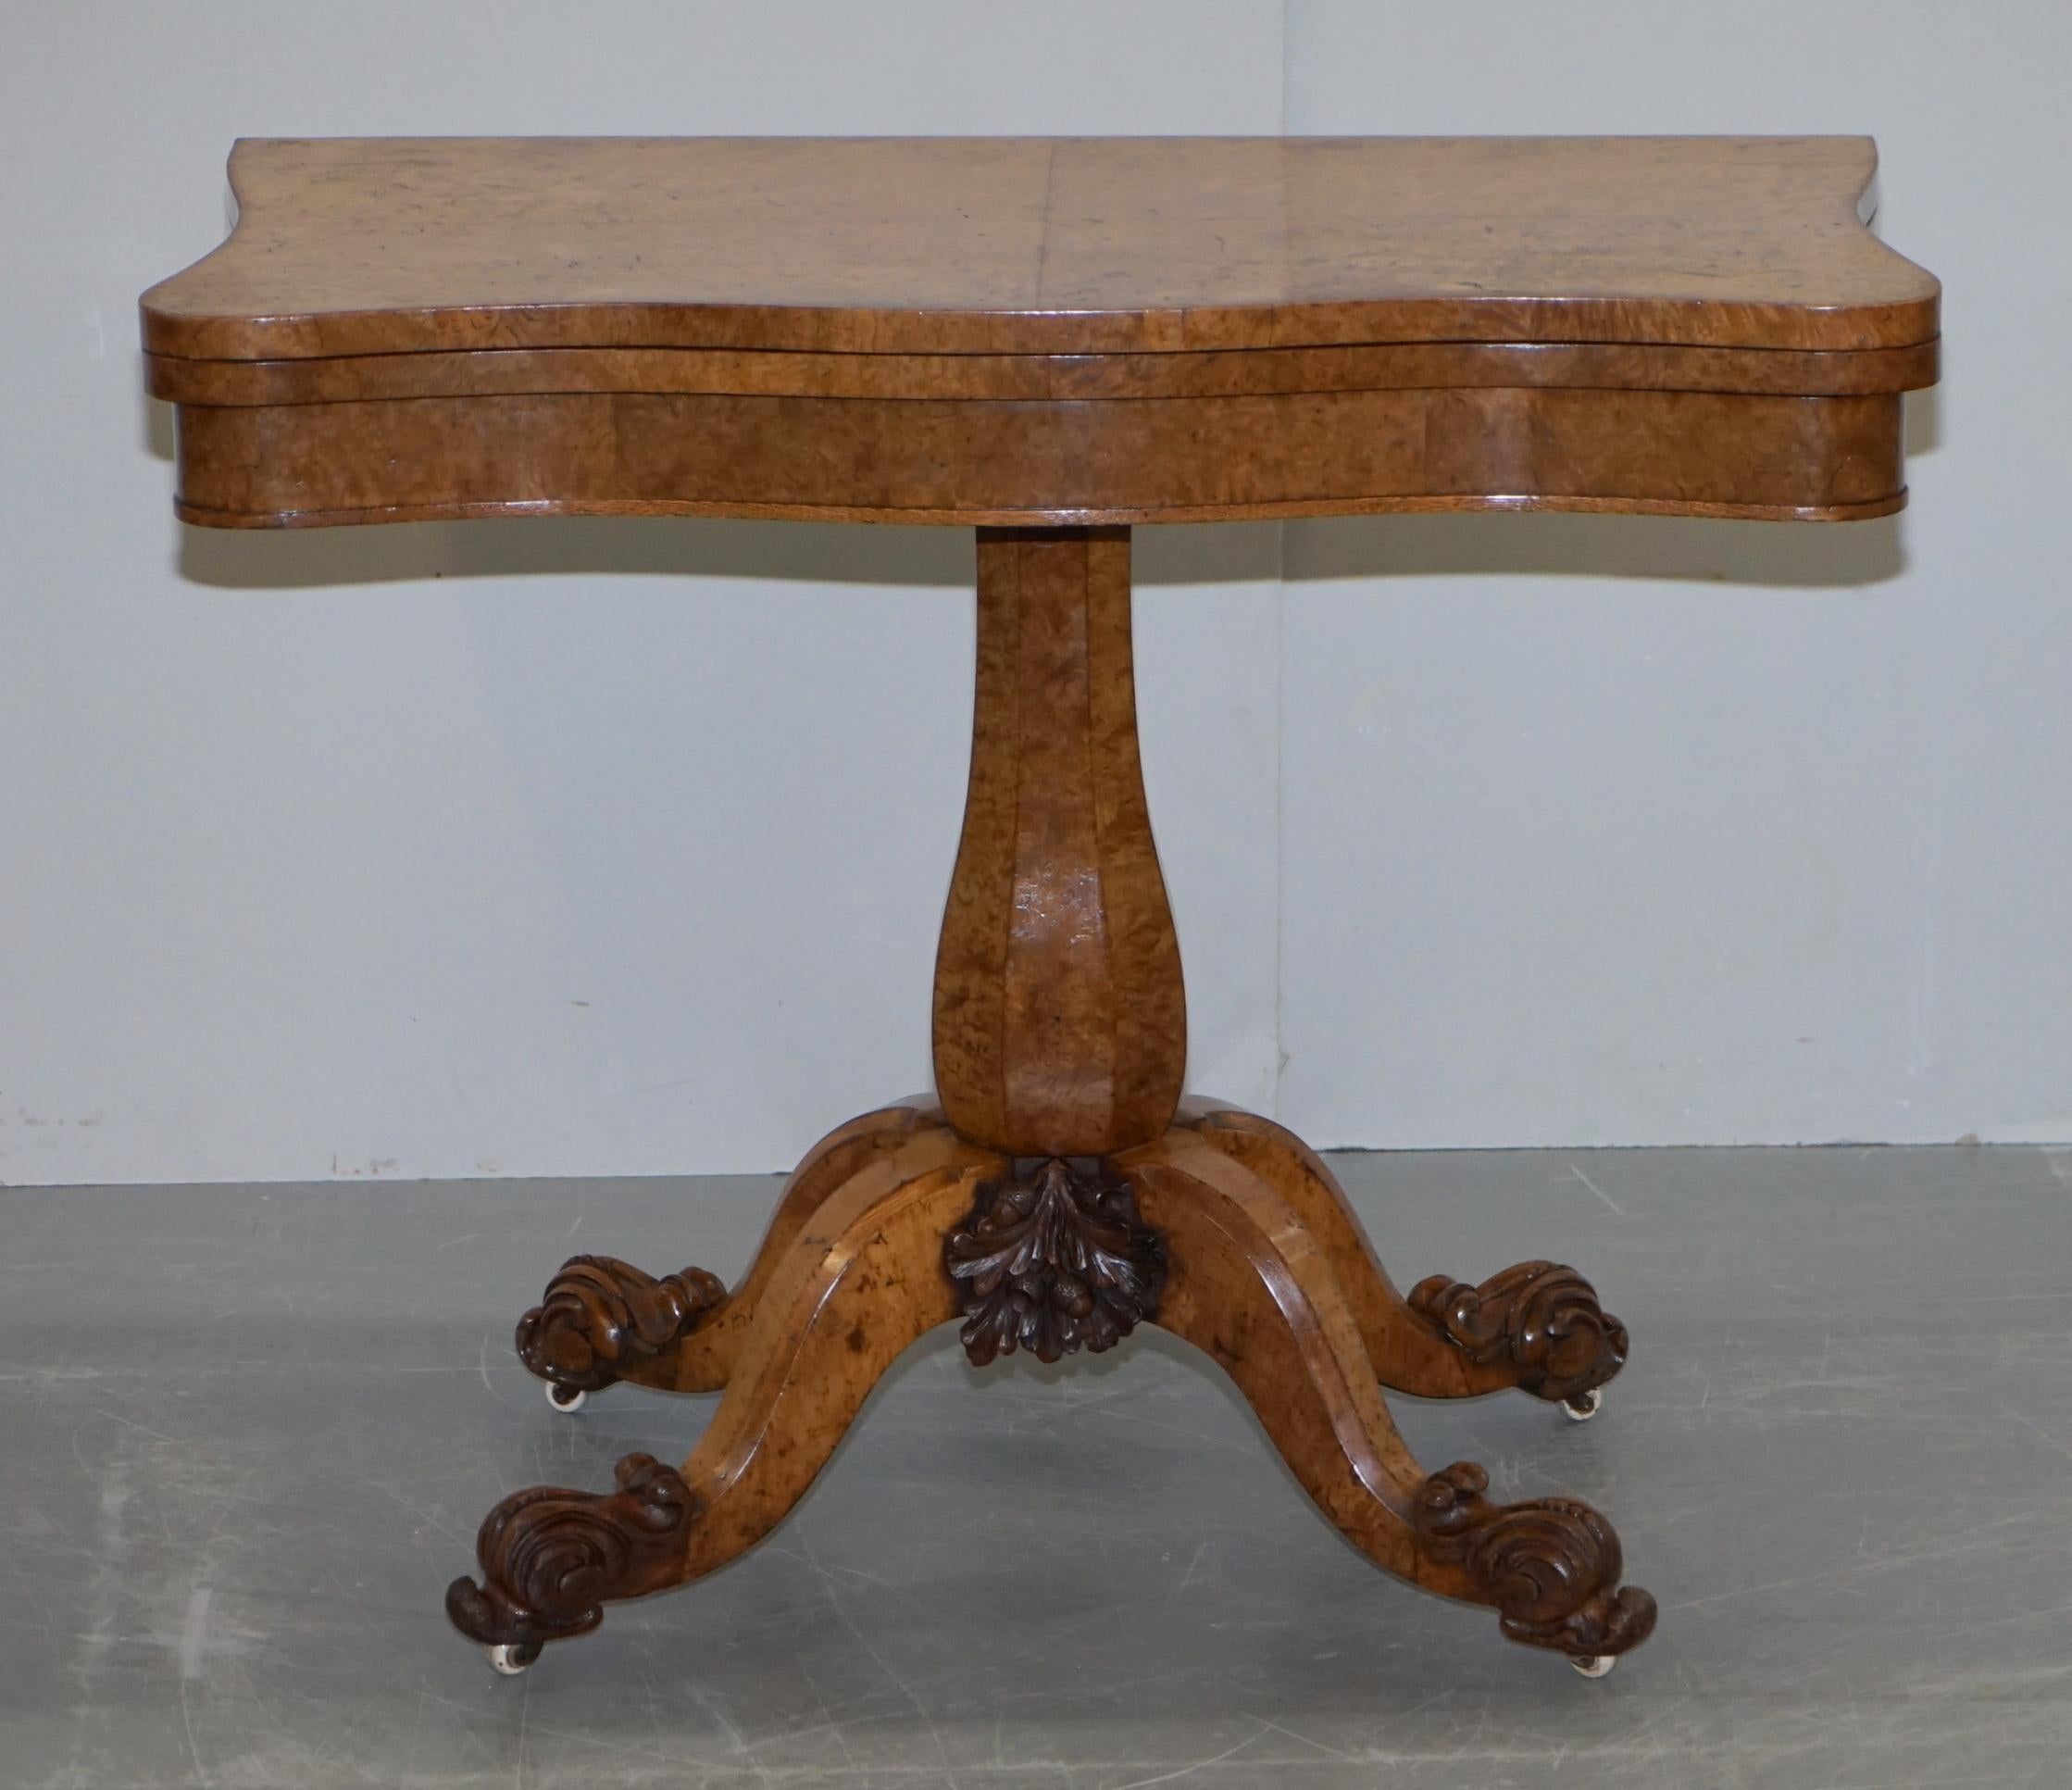 We are delighted to offer for sale this very fine original circa 1835 William IV Pollard oak carved fold over card table with JC Patent stamped porcelain castors

A William IV pollard oak and carved oak folding tea table, circa 1835, the